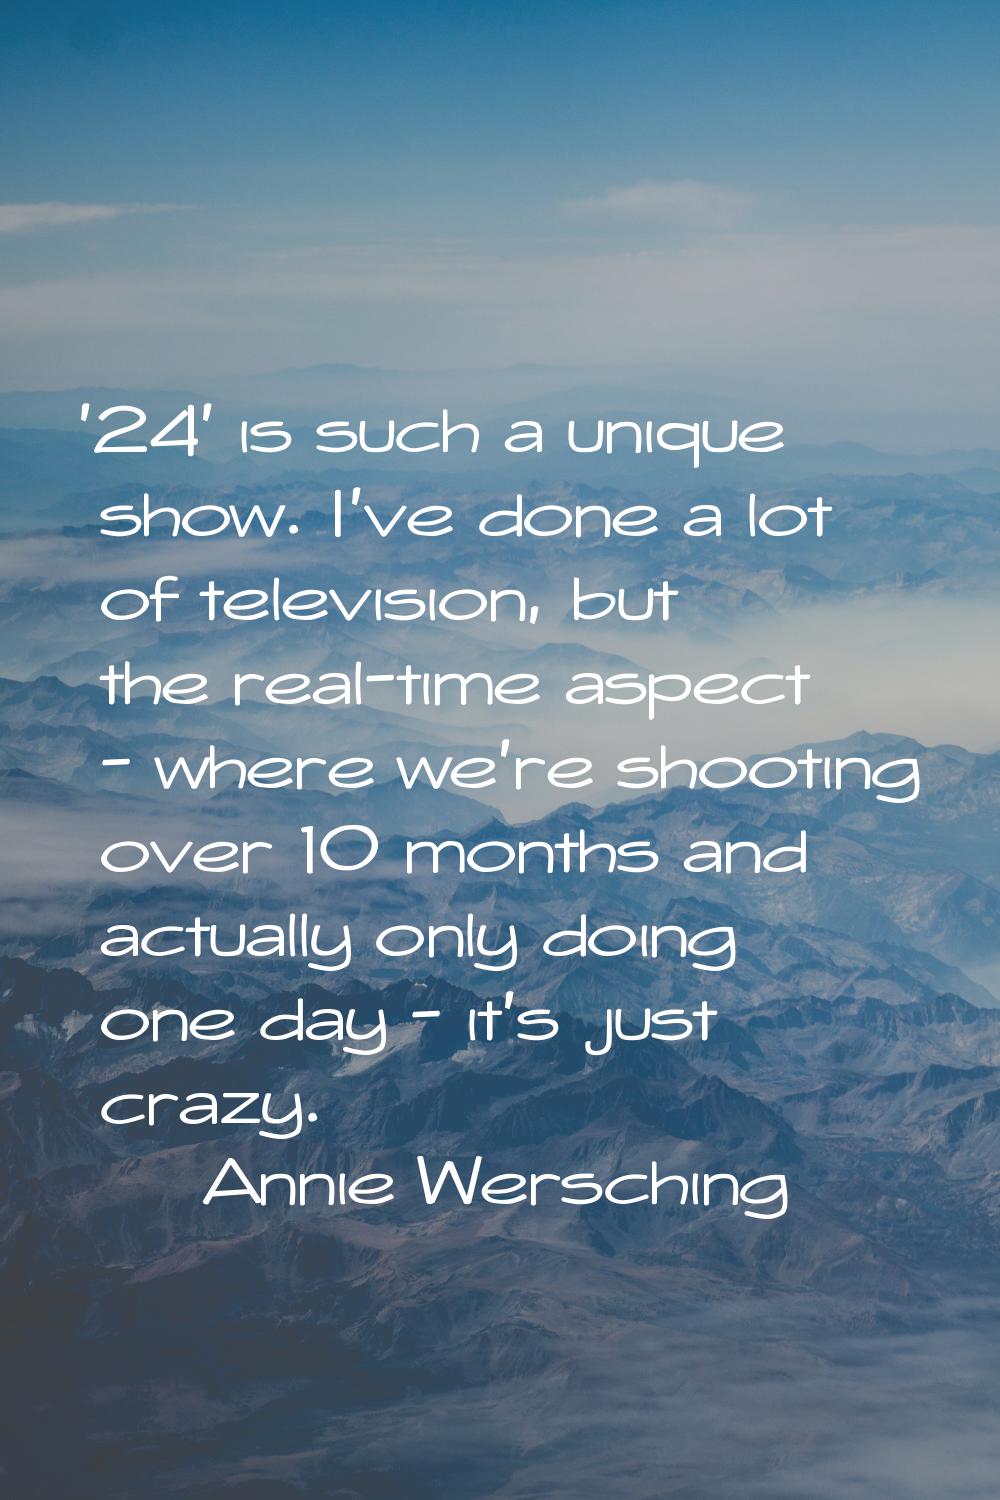 '24' is such a unique show. I've done a lot of television, but the real-time aspect - where we're s